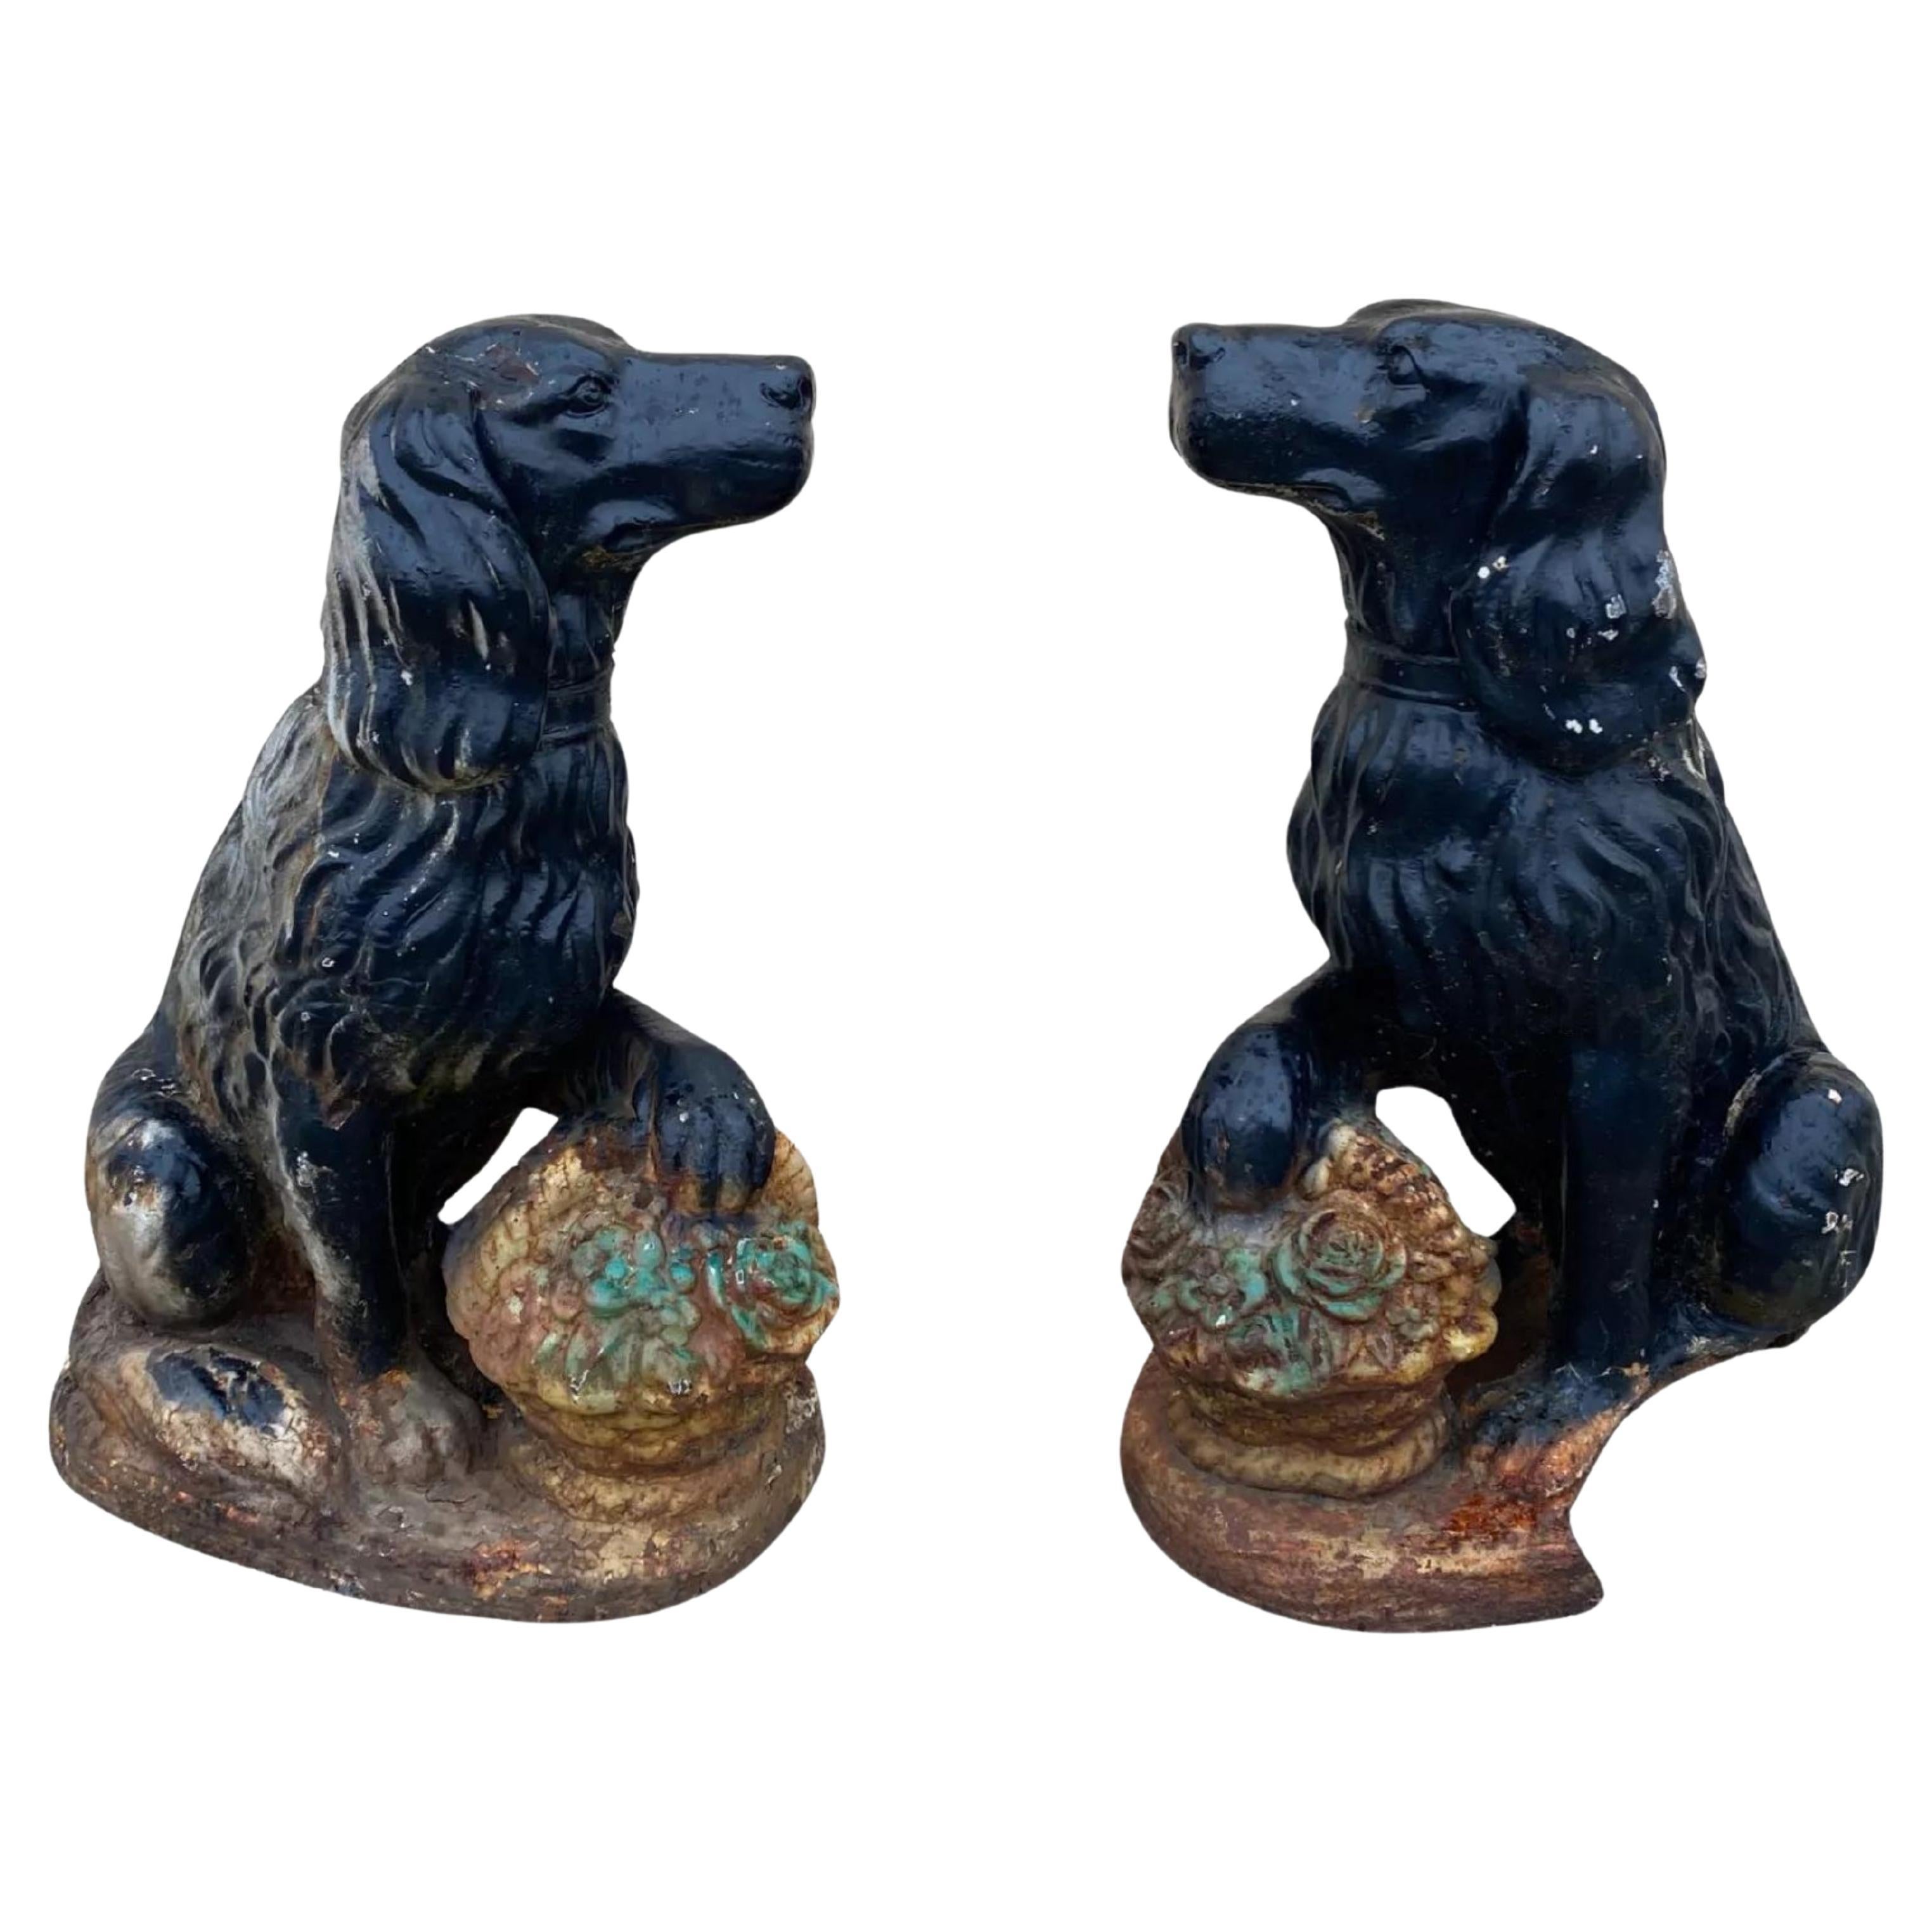 Cast Iron Victorian Seated Golden Retriever Dog Guardian Garden Entry Statues For Sale